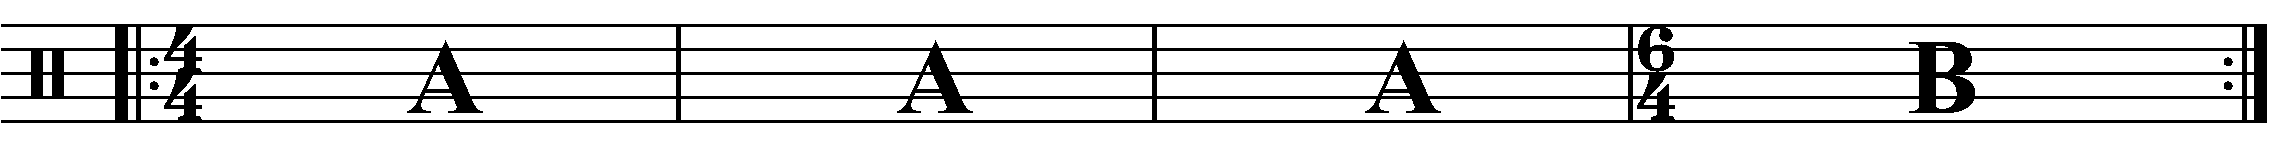 A four bar phrase using 6/4 for the 'B' section.